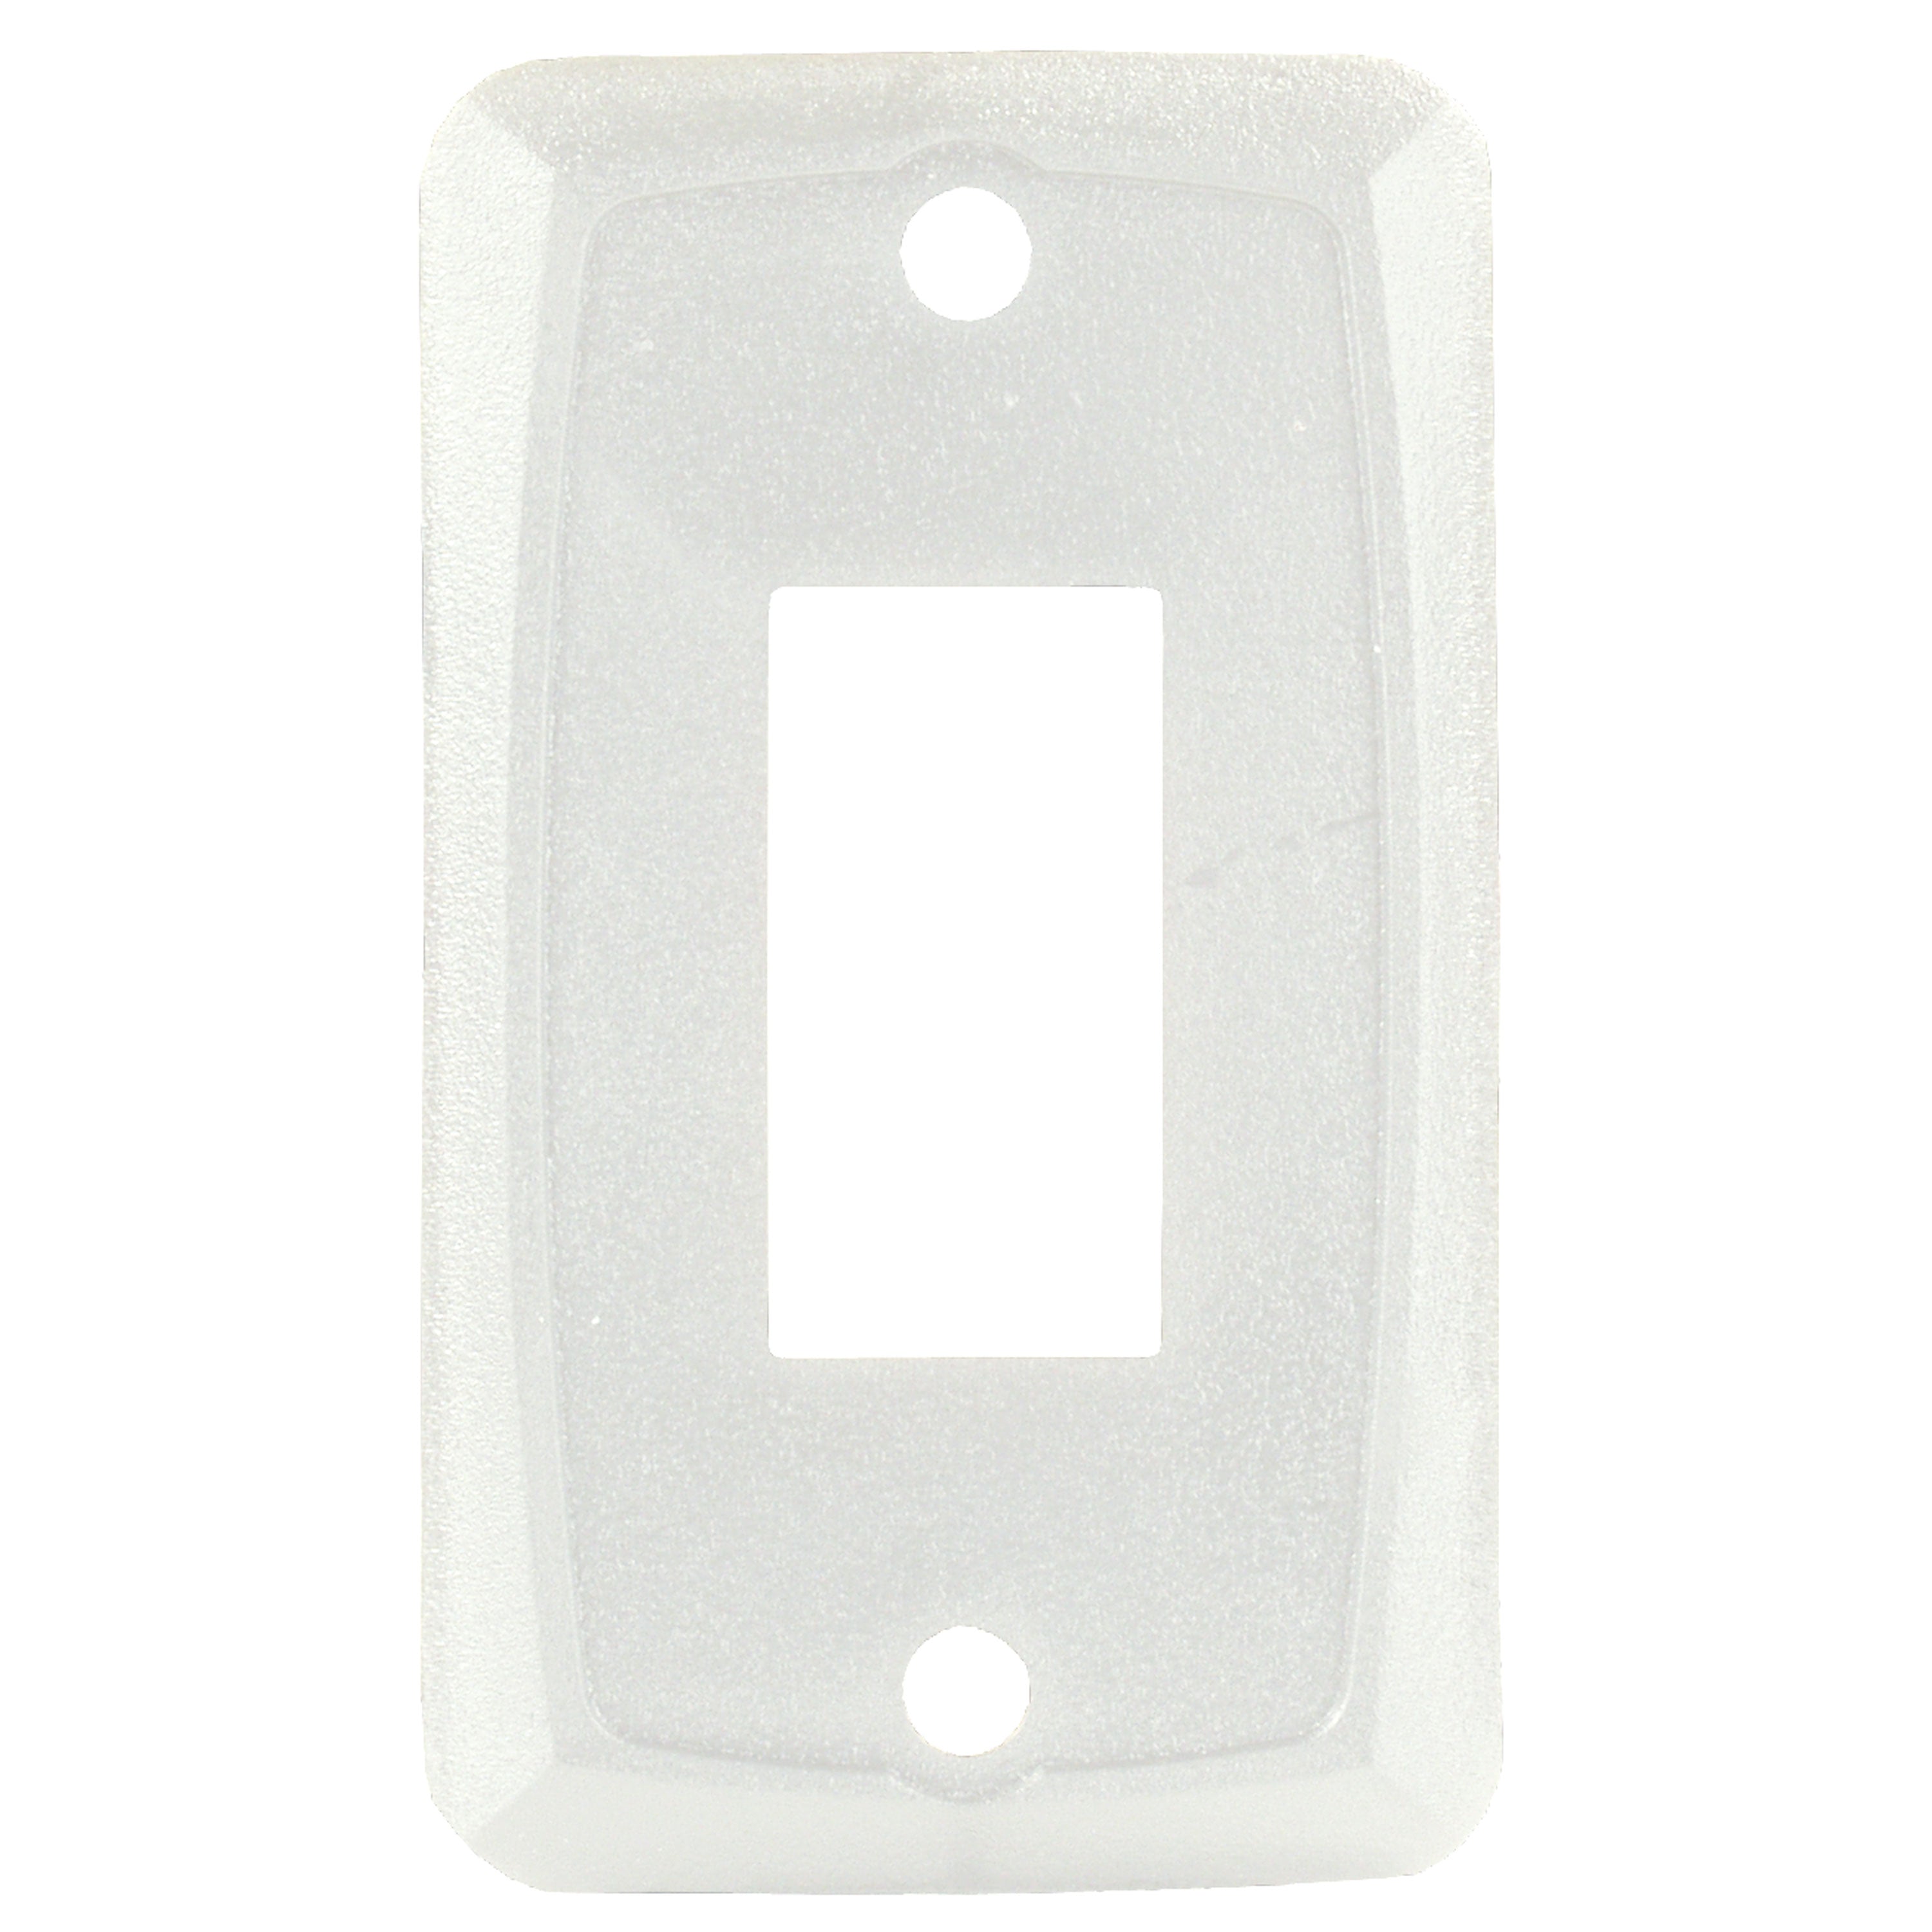 JR Products 12841-5 Single Face Plate, Pack of 5 - White